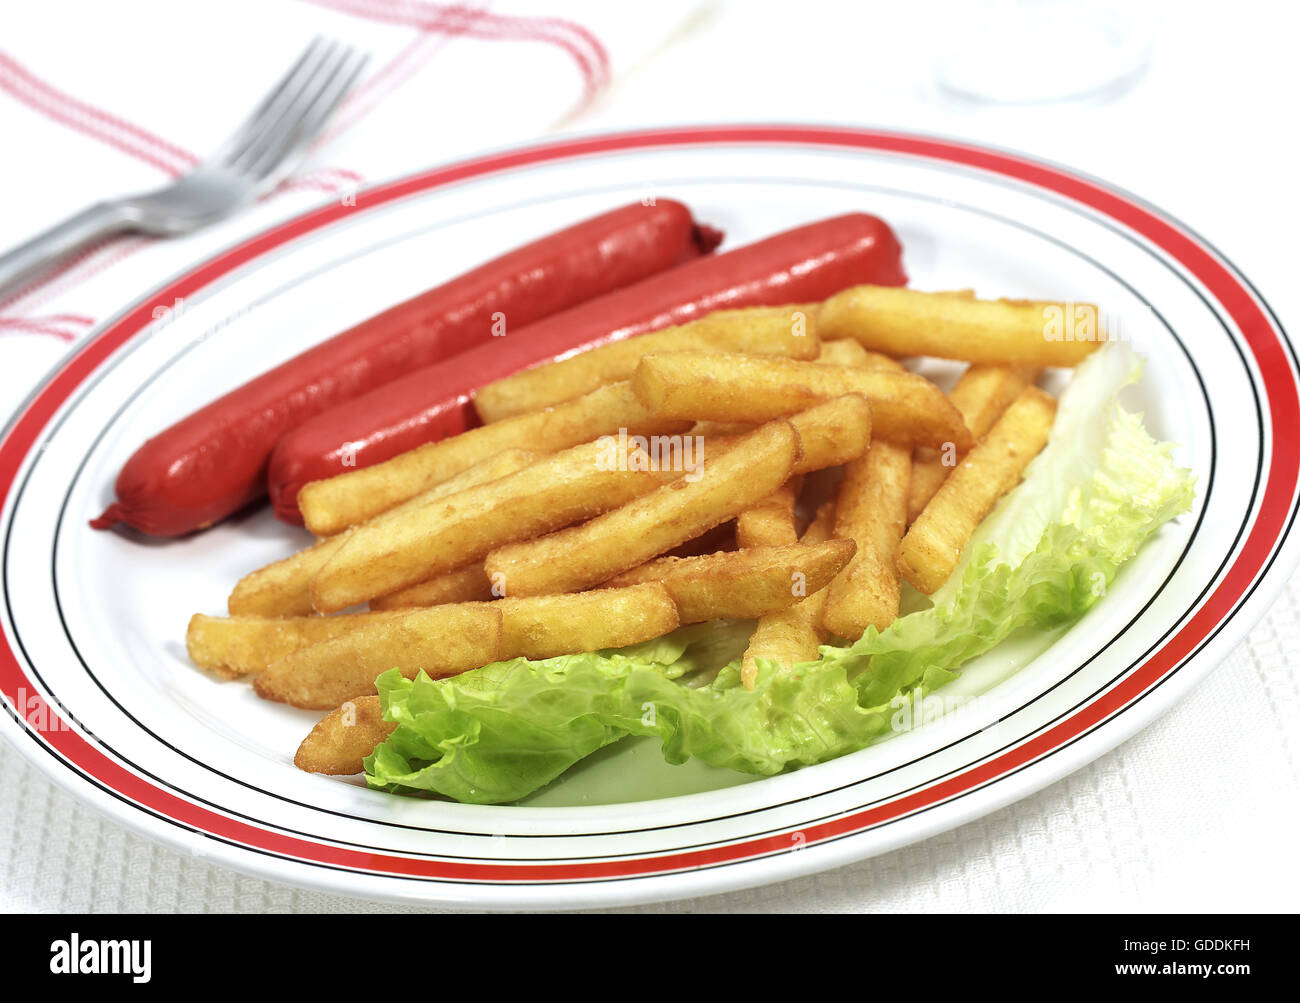 Plate with Sausage and French Fries Stock Photo